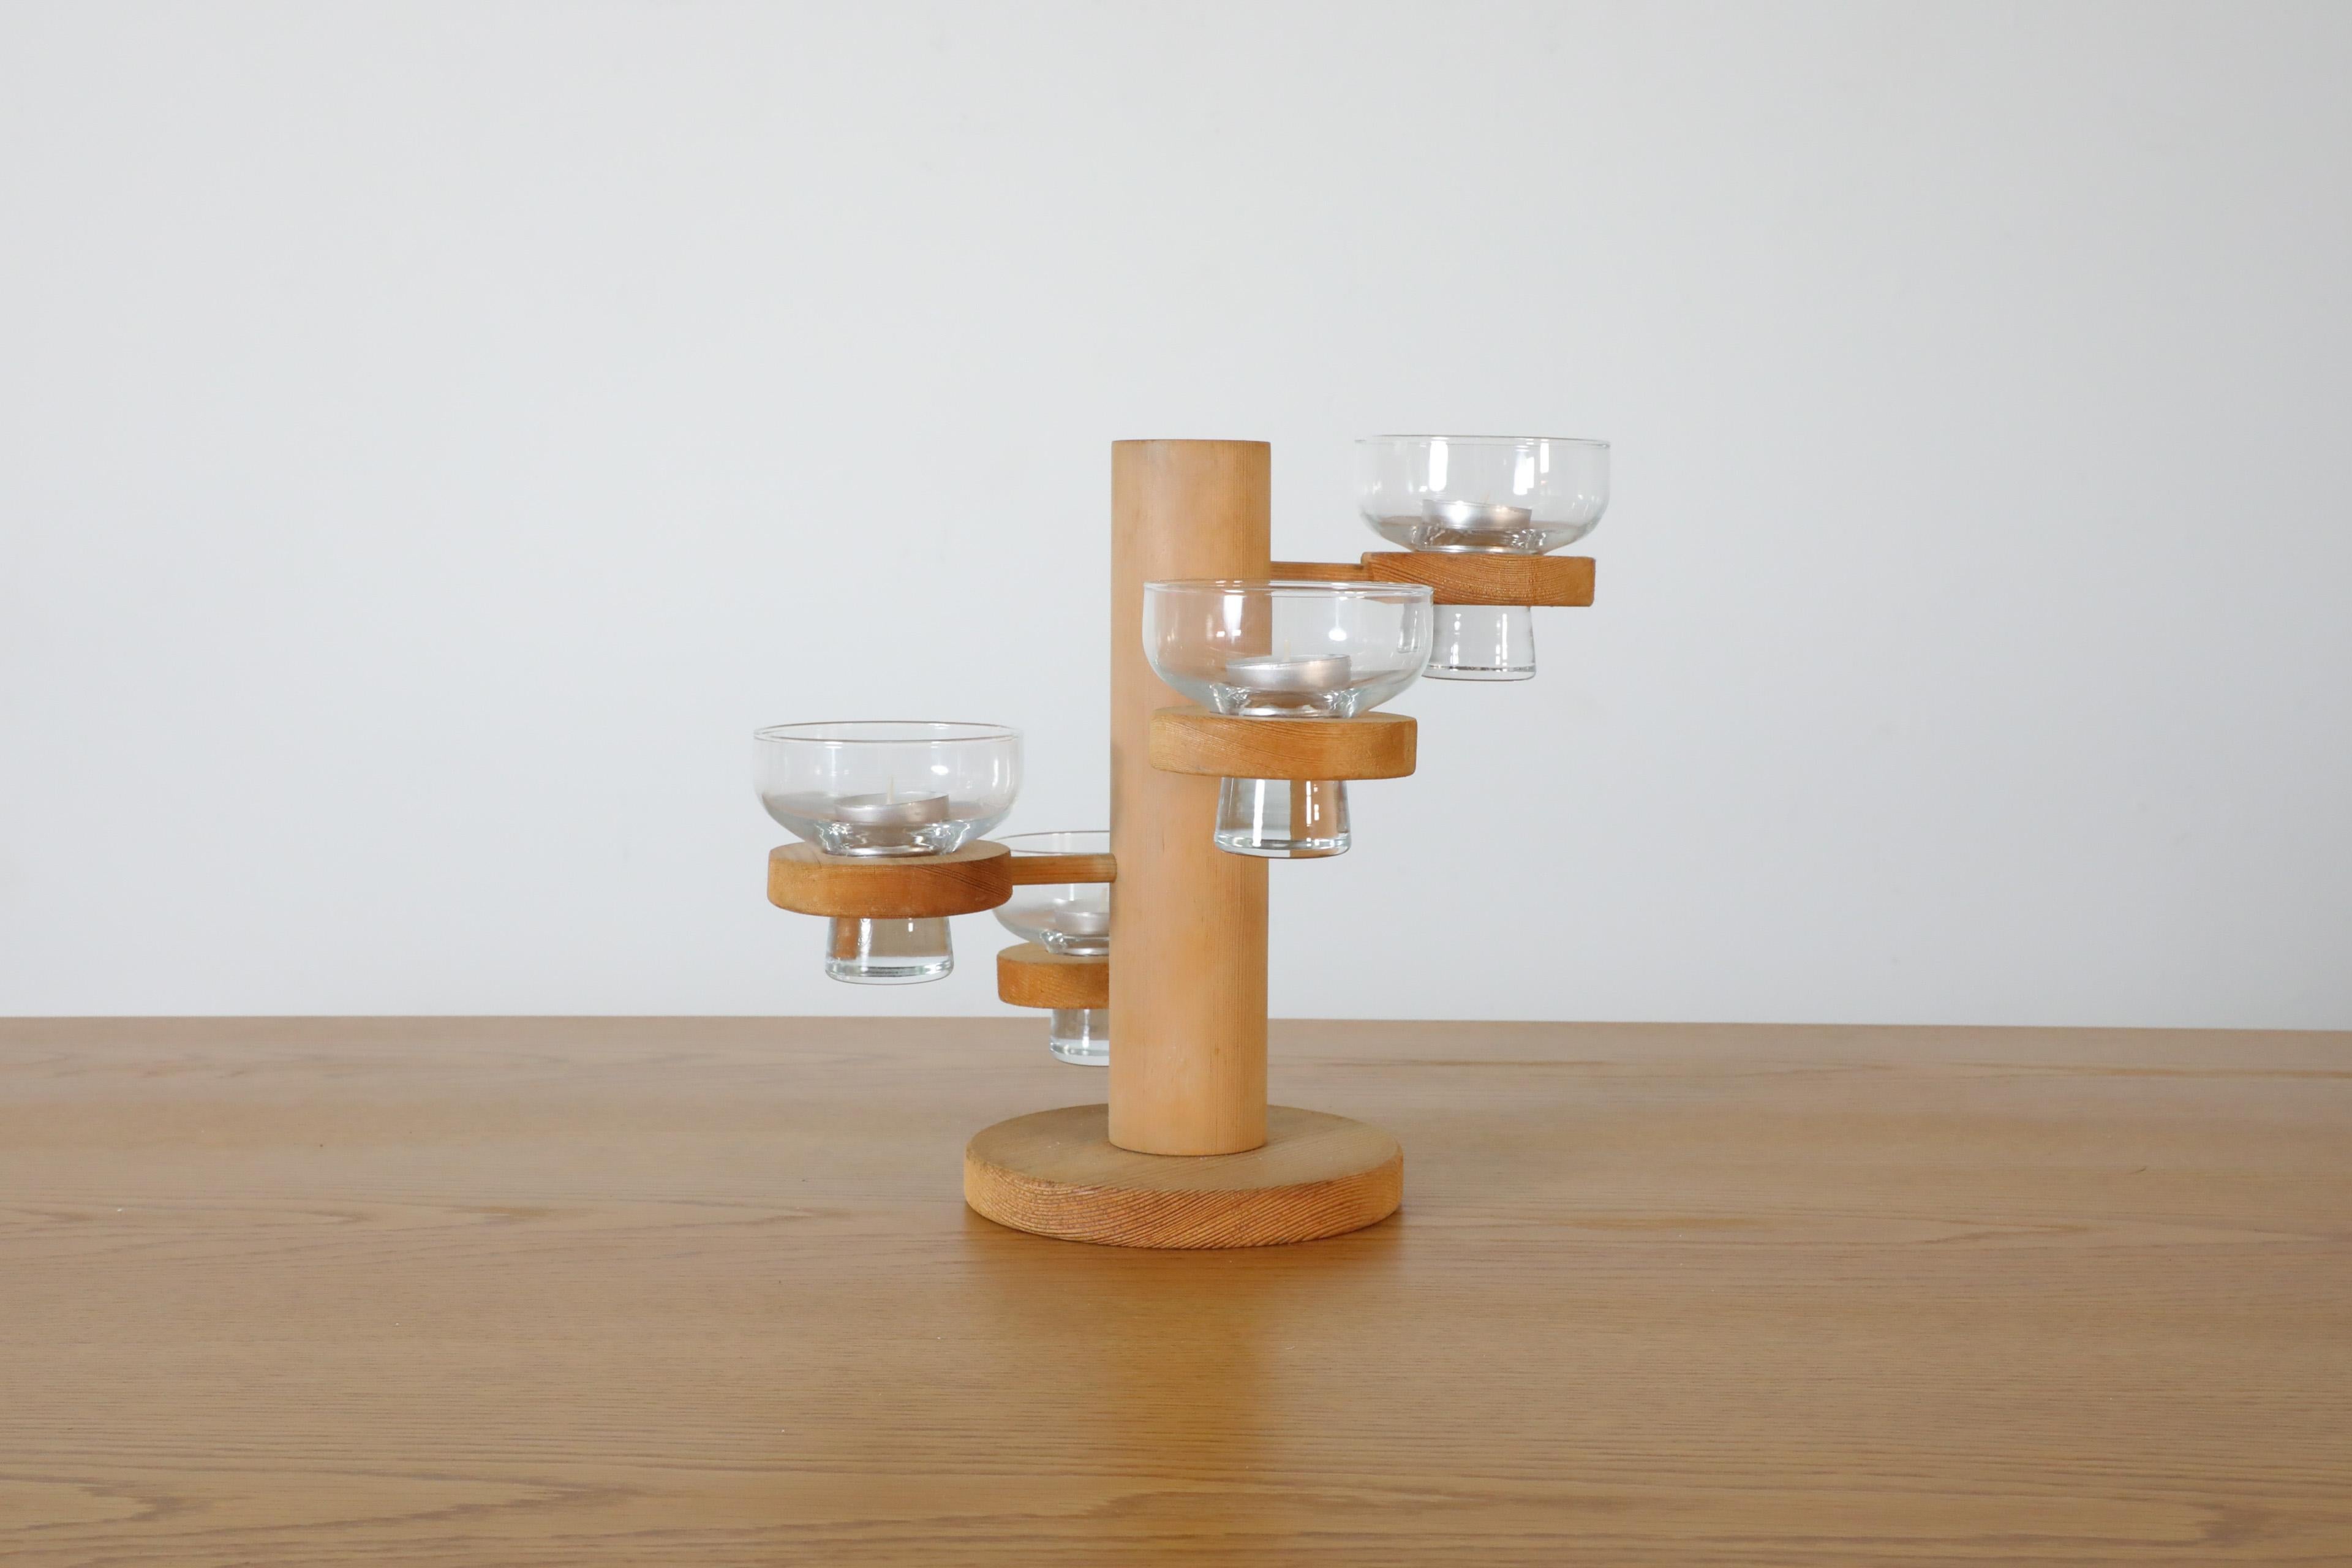 Danish Mid-Century multi-level pine candle holder with glass dishes by Harlyk Denmark, 1960's. This well designed piece will serve beautifully as a centerpiece and can be used to hold a variety of things other than candles. In original condition